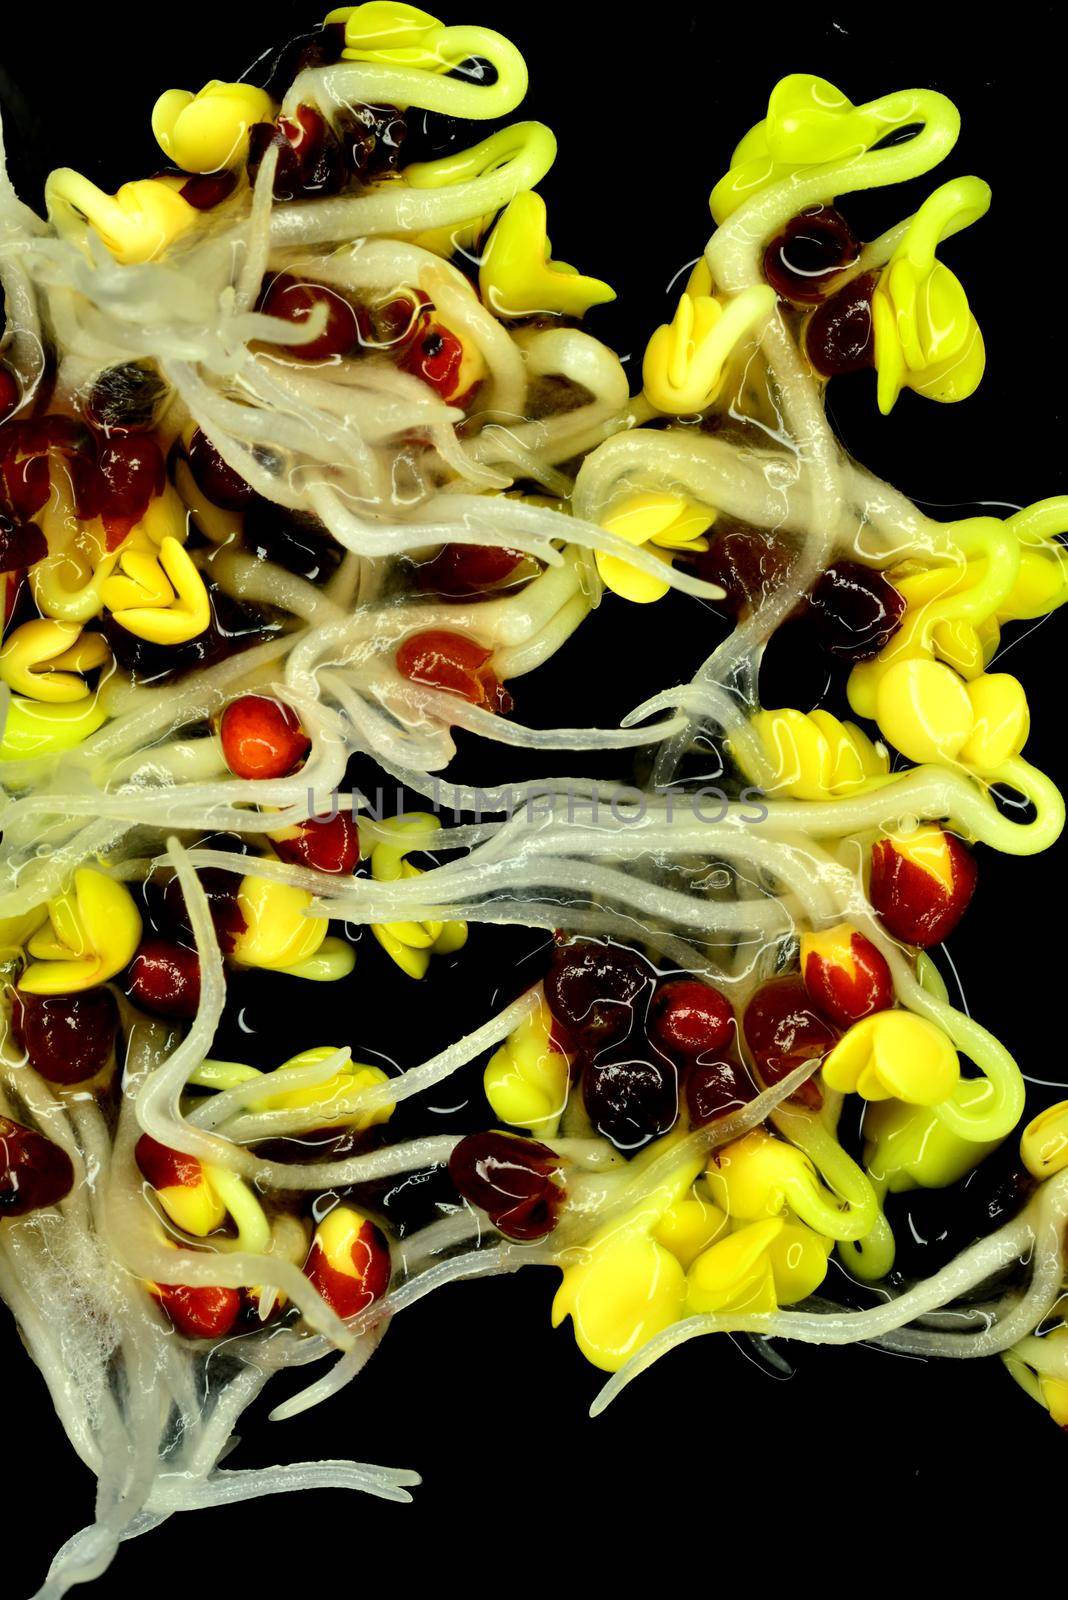 radish sprouts, closeup of the germs by Jochen